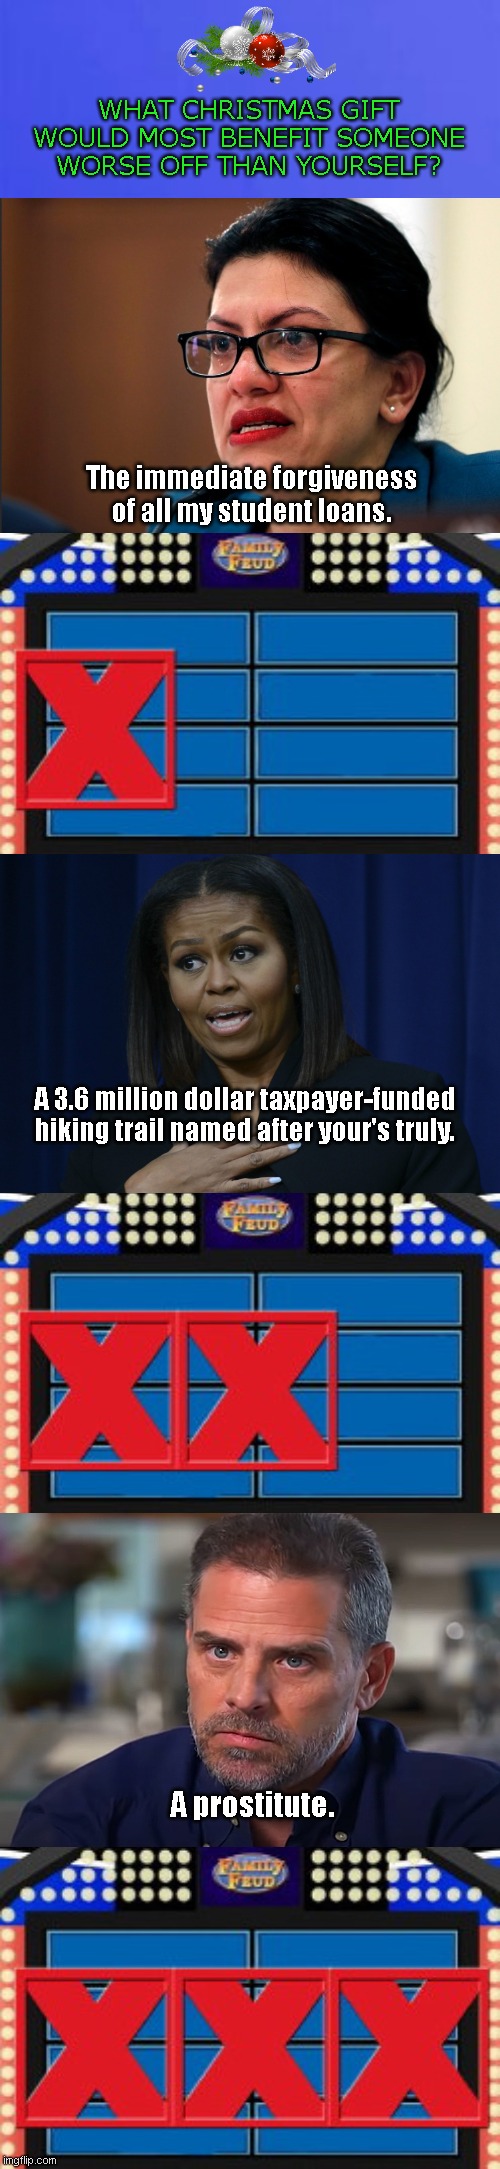 Liberal Family Feud Christmas edition | WHAT CHRISTMAS GIFT WOULD MOST BENEFIT SOMEONE WORSE OFF THAN YOURSELF? The immediate forgiveness of all my student loans. A 3.6 million dollar taxpayer-funded hiking trail named after your's truly. A prostitute. | image tagged in family feud 3 strikes,stupid liberals,rashida tlaib,michelle obama,hunter biden,government waste | made w/ Imgflip meme maker